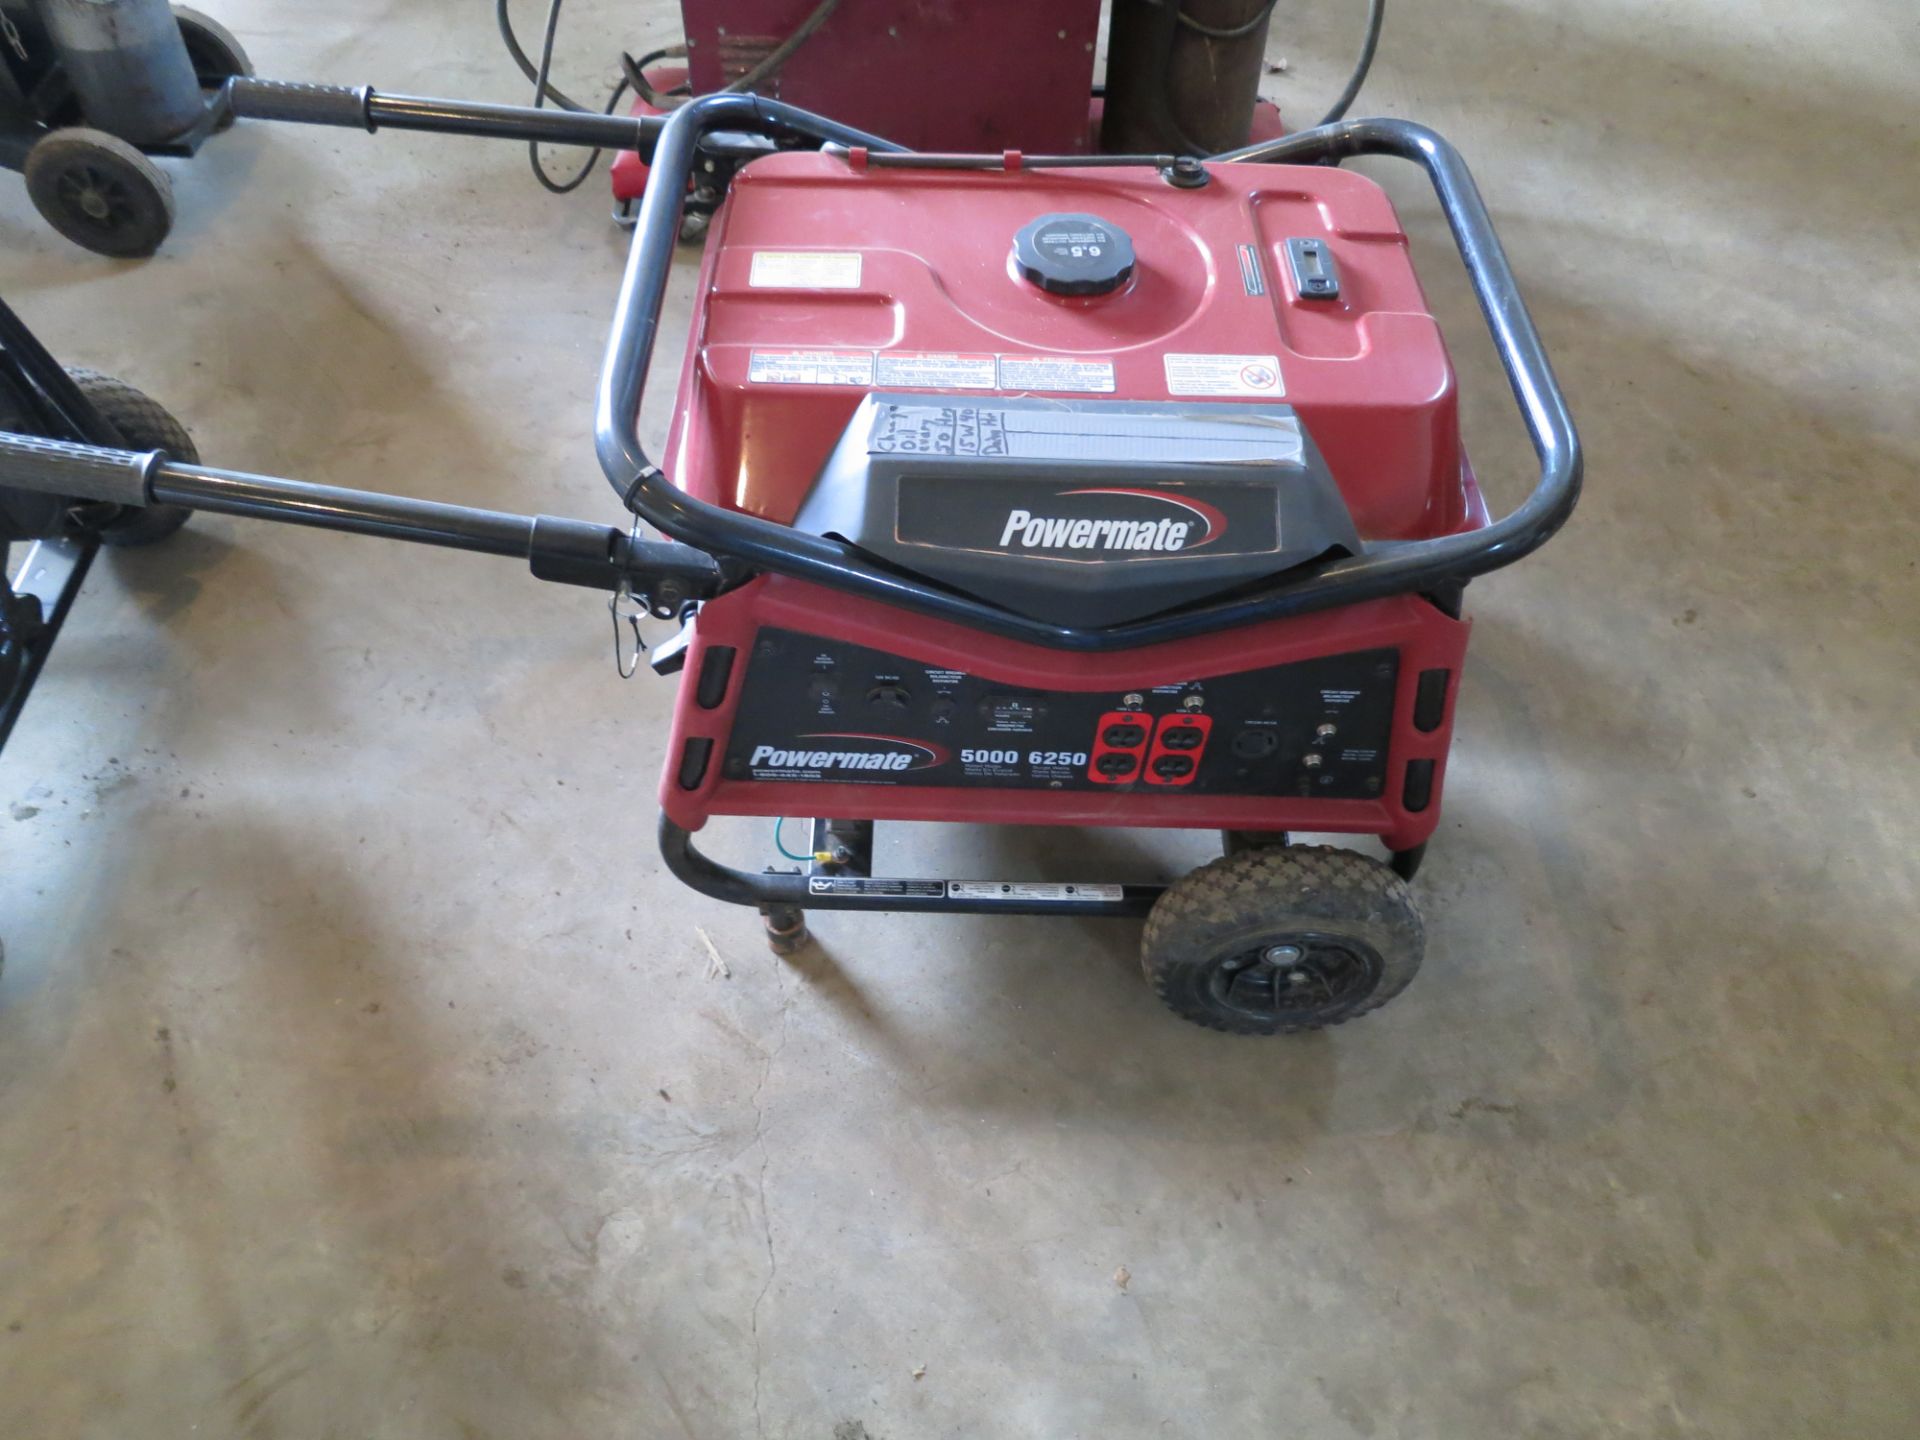 Powermate 5000 portable generators- (56 hours) owned by Bless You Inc.,